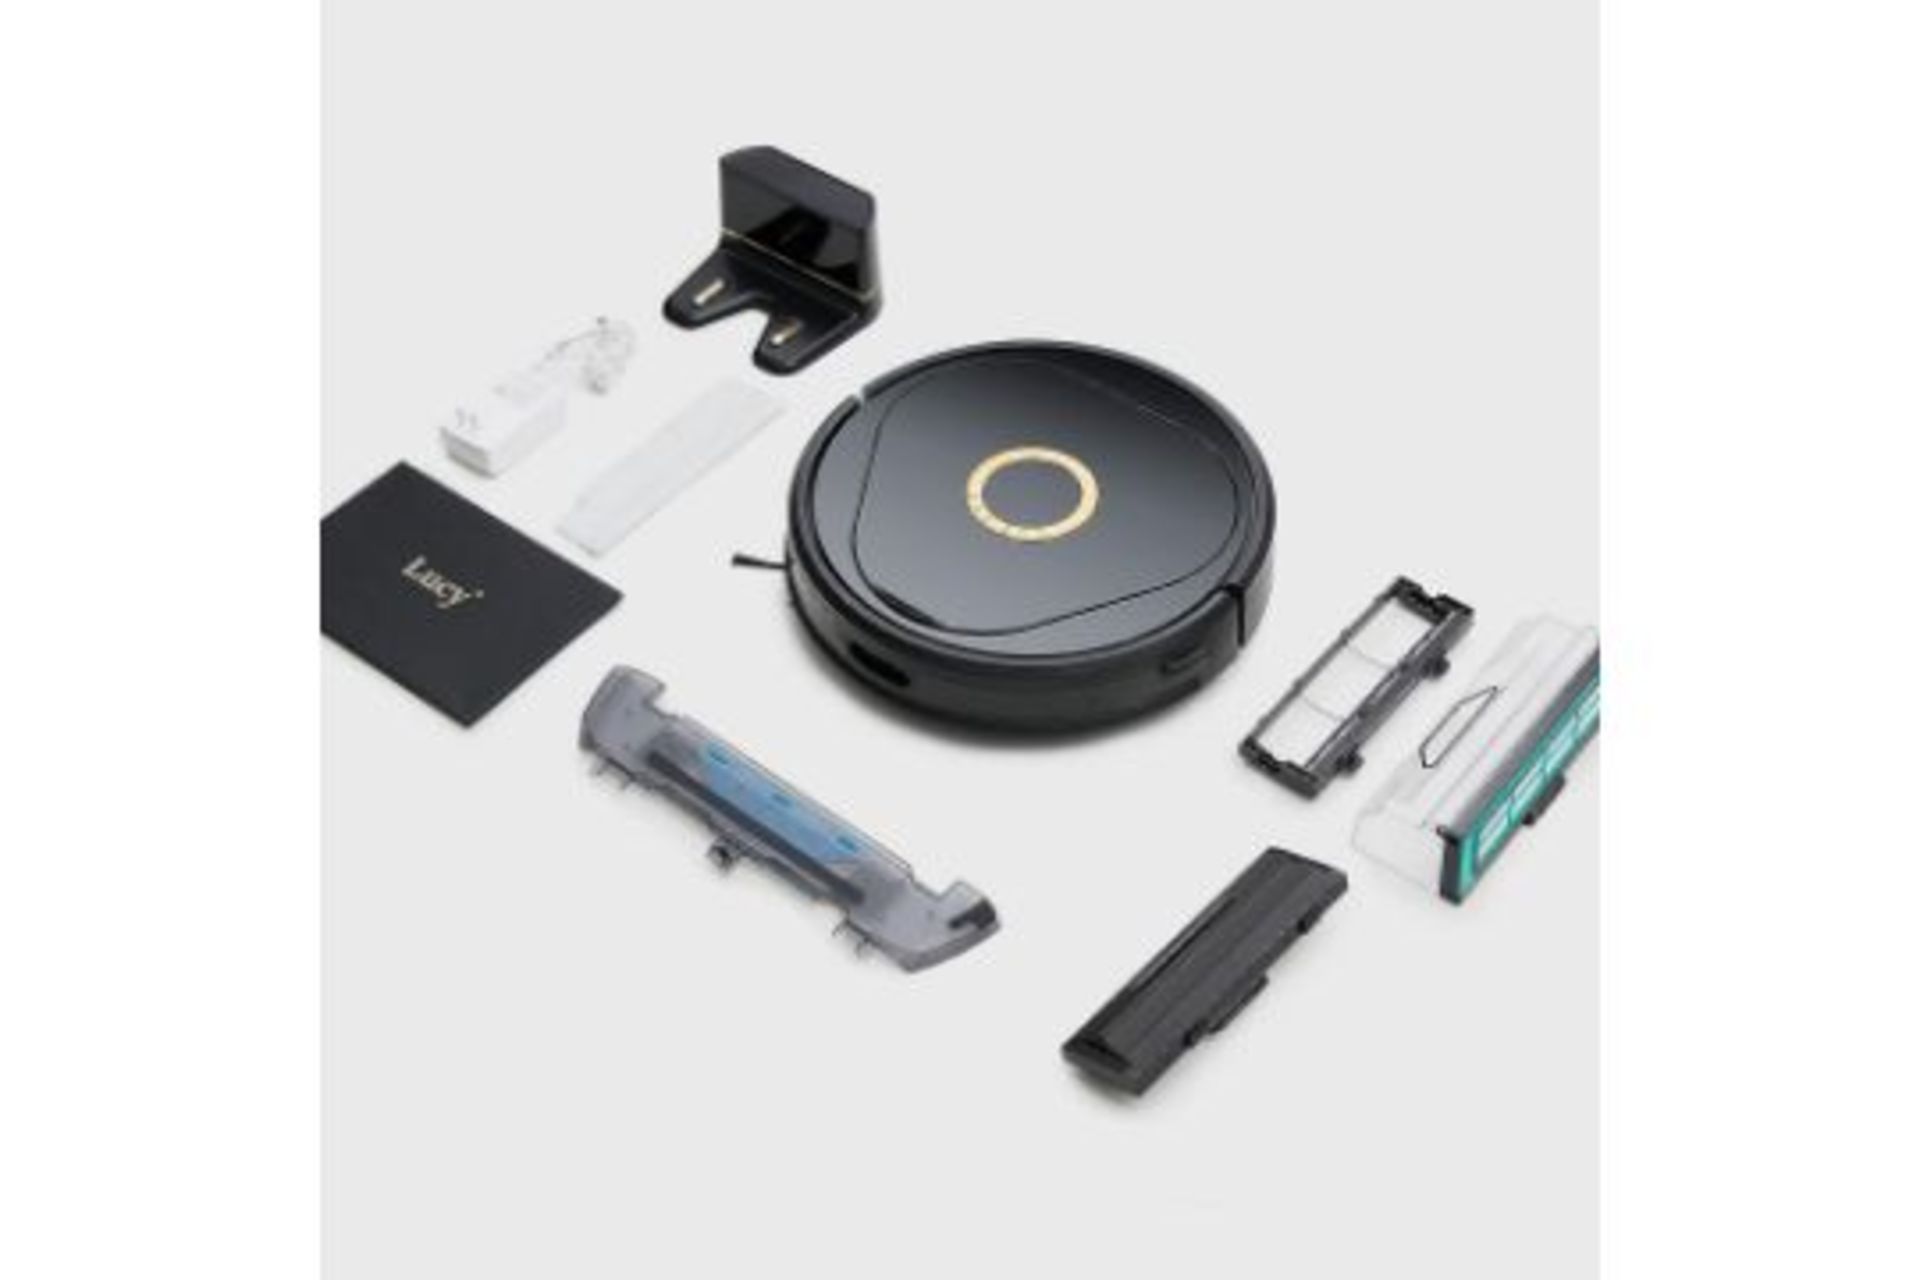 New & Boxed Robot Vacuum Cleaner Lucy with 3D-SLAM Navigation. RRP £369.99. 4000Pa Suction, No-